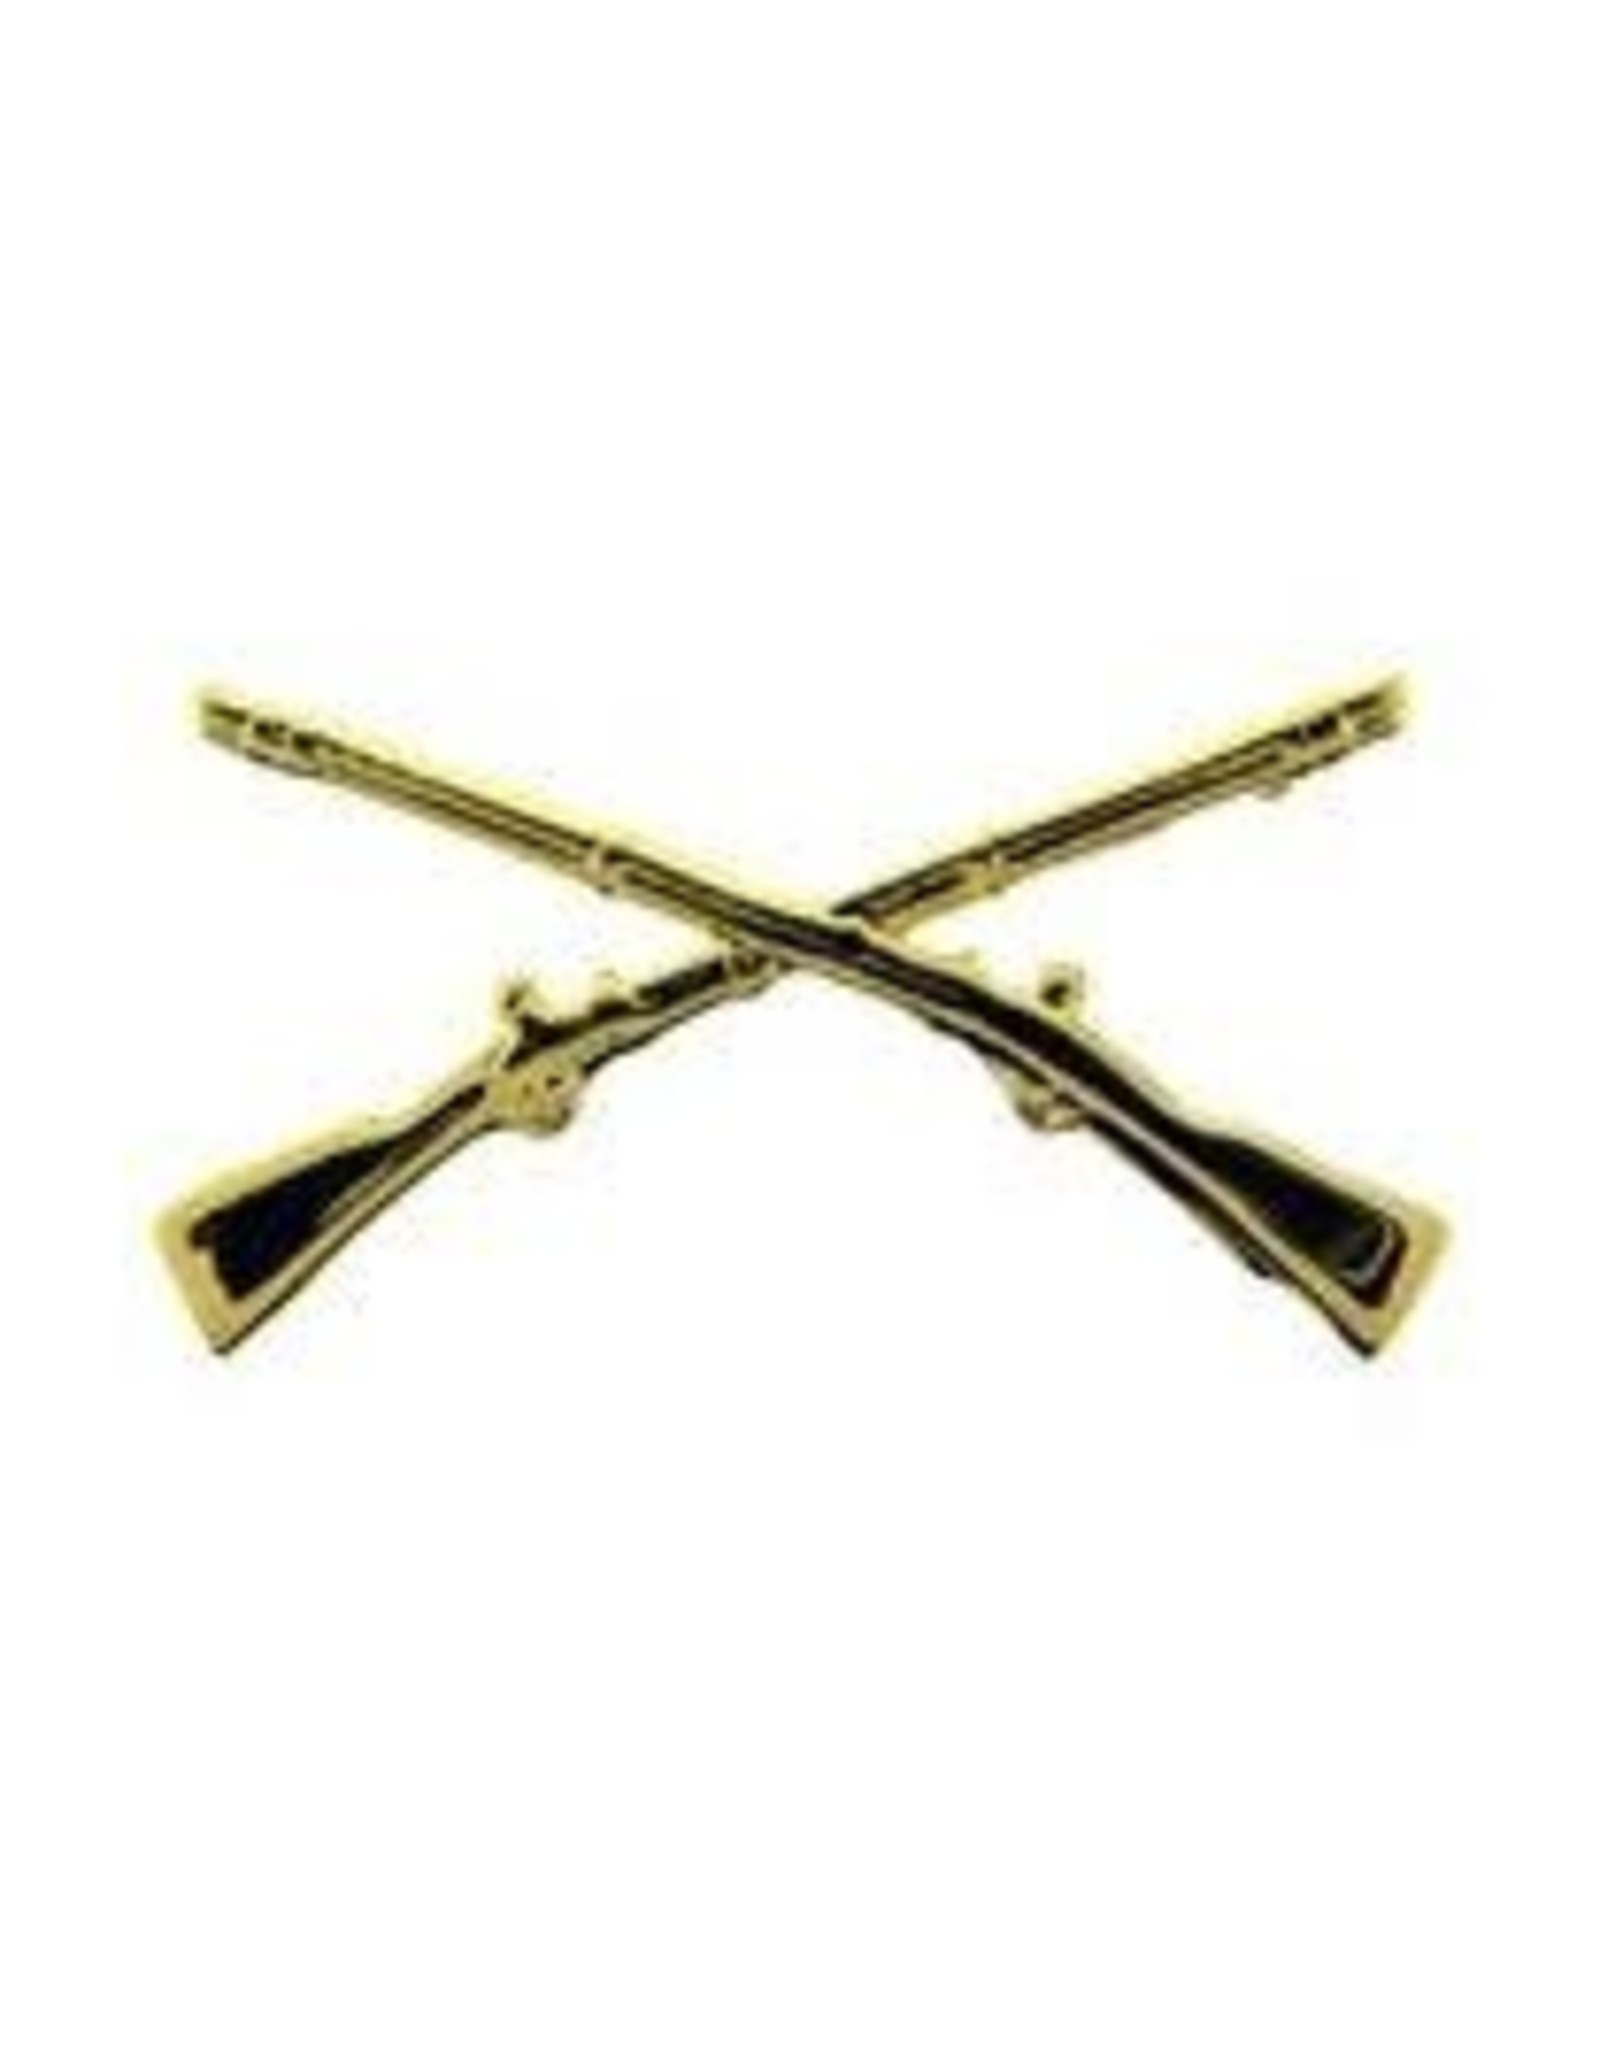 Pin - Army Infantry Rifles